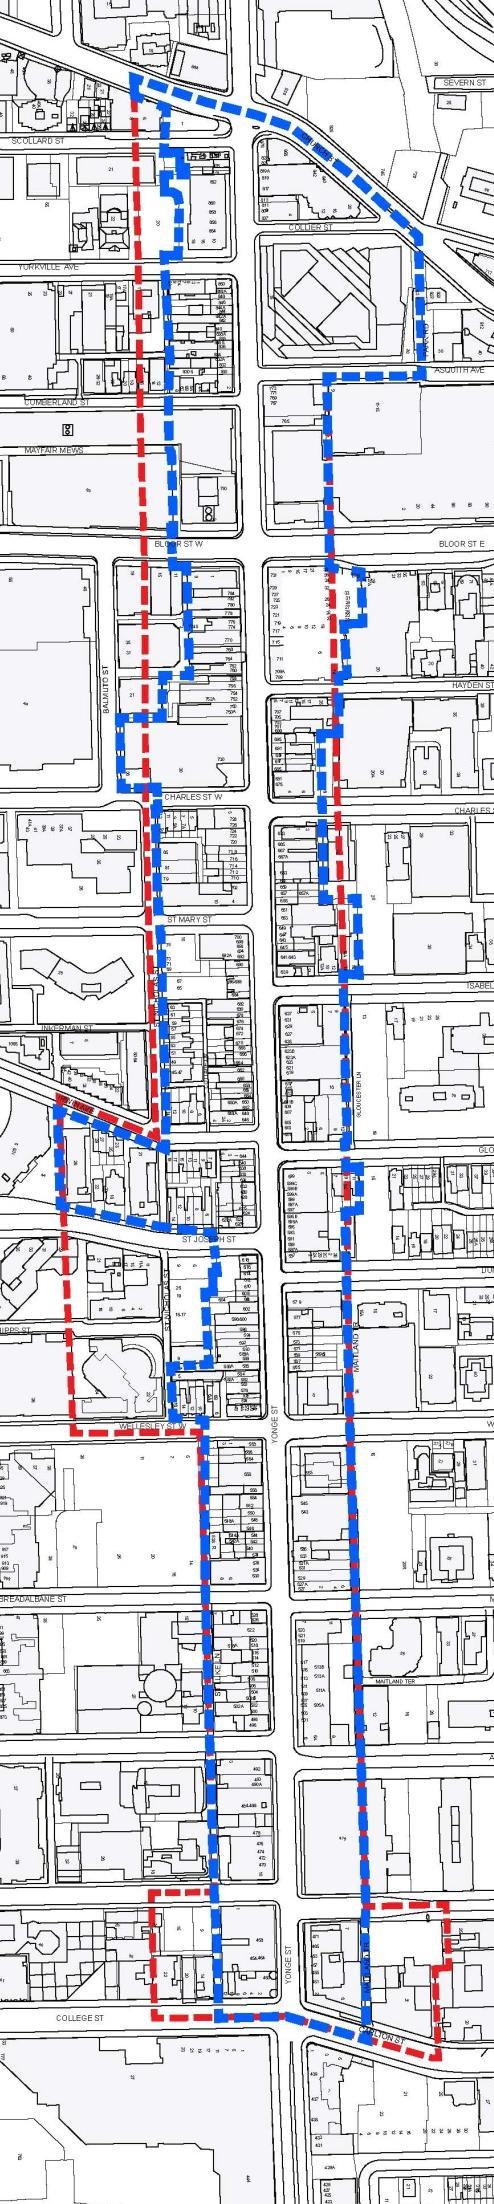 HCD Boundary + Objectives Proposed HCD Boundary Main Street, Yonge/College, and Yonge/Bloor - The proposed HCD boundary includes identified character areas and primarily includes properties fronting